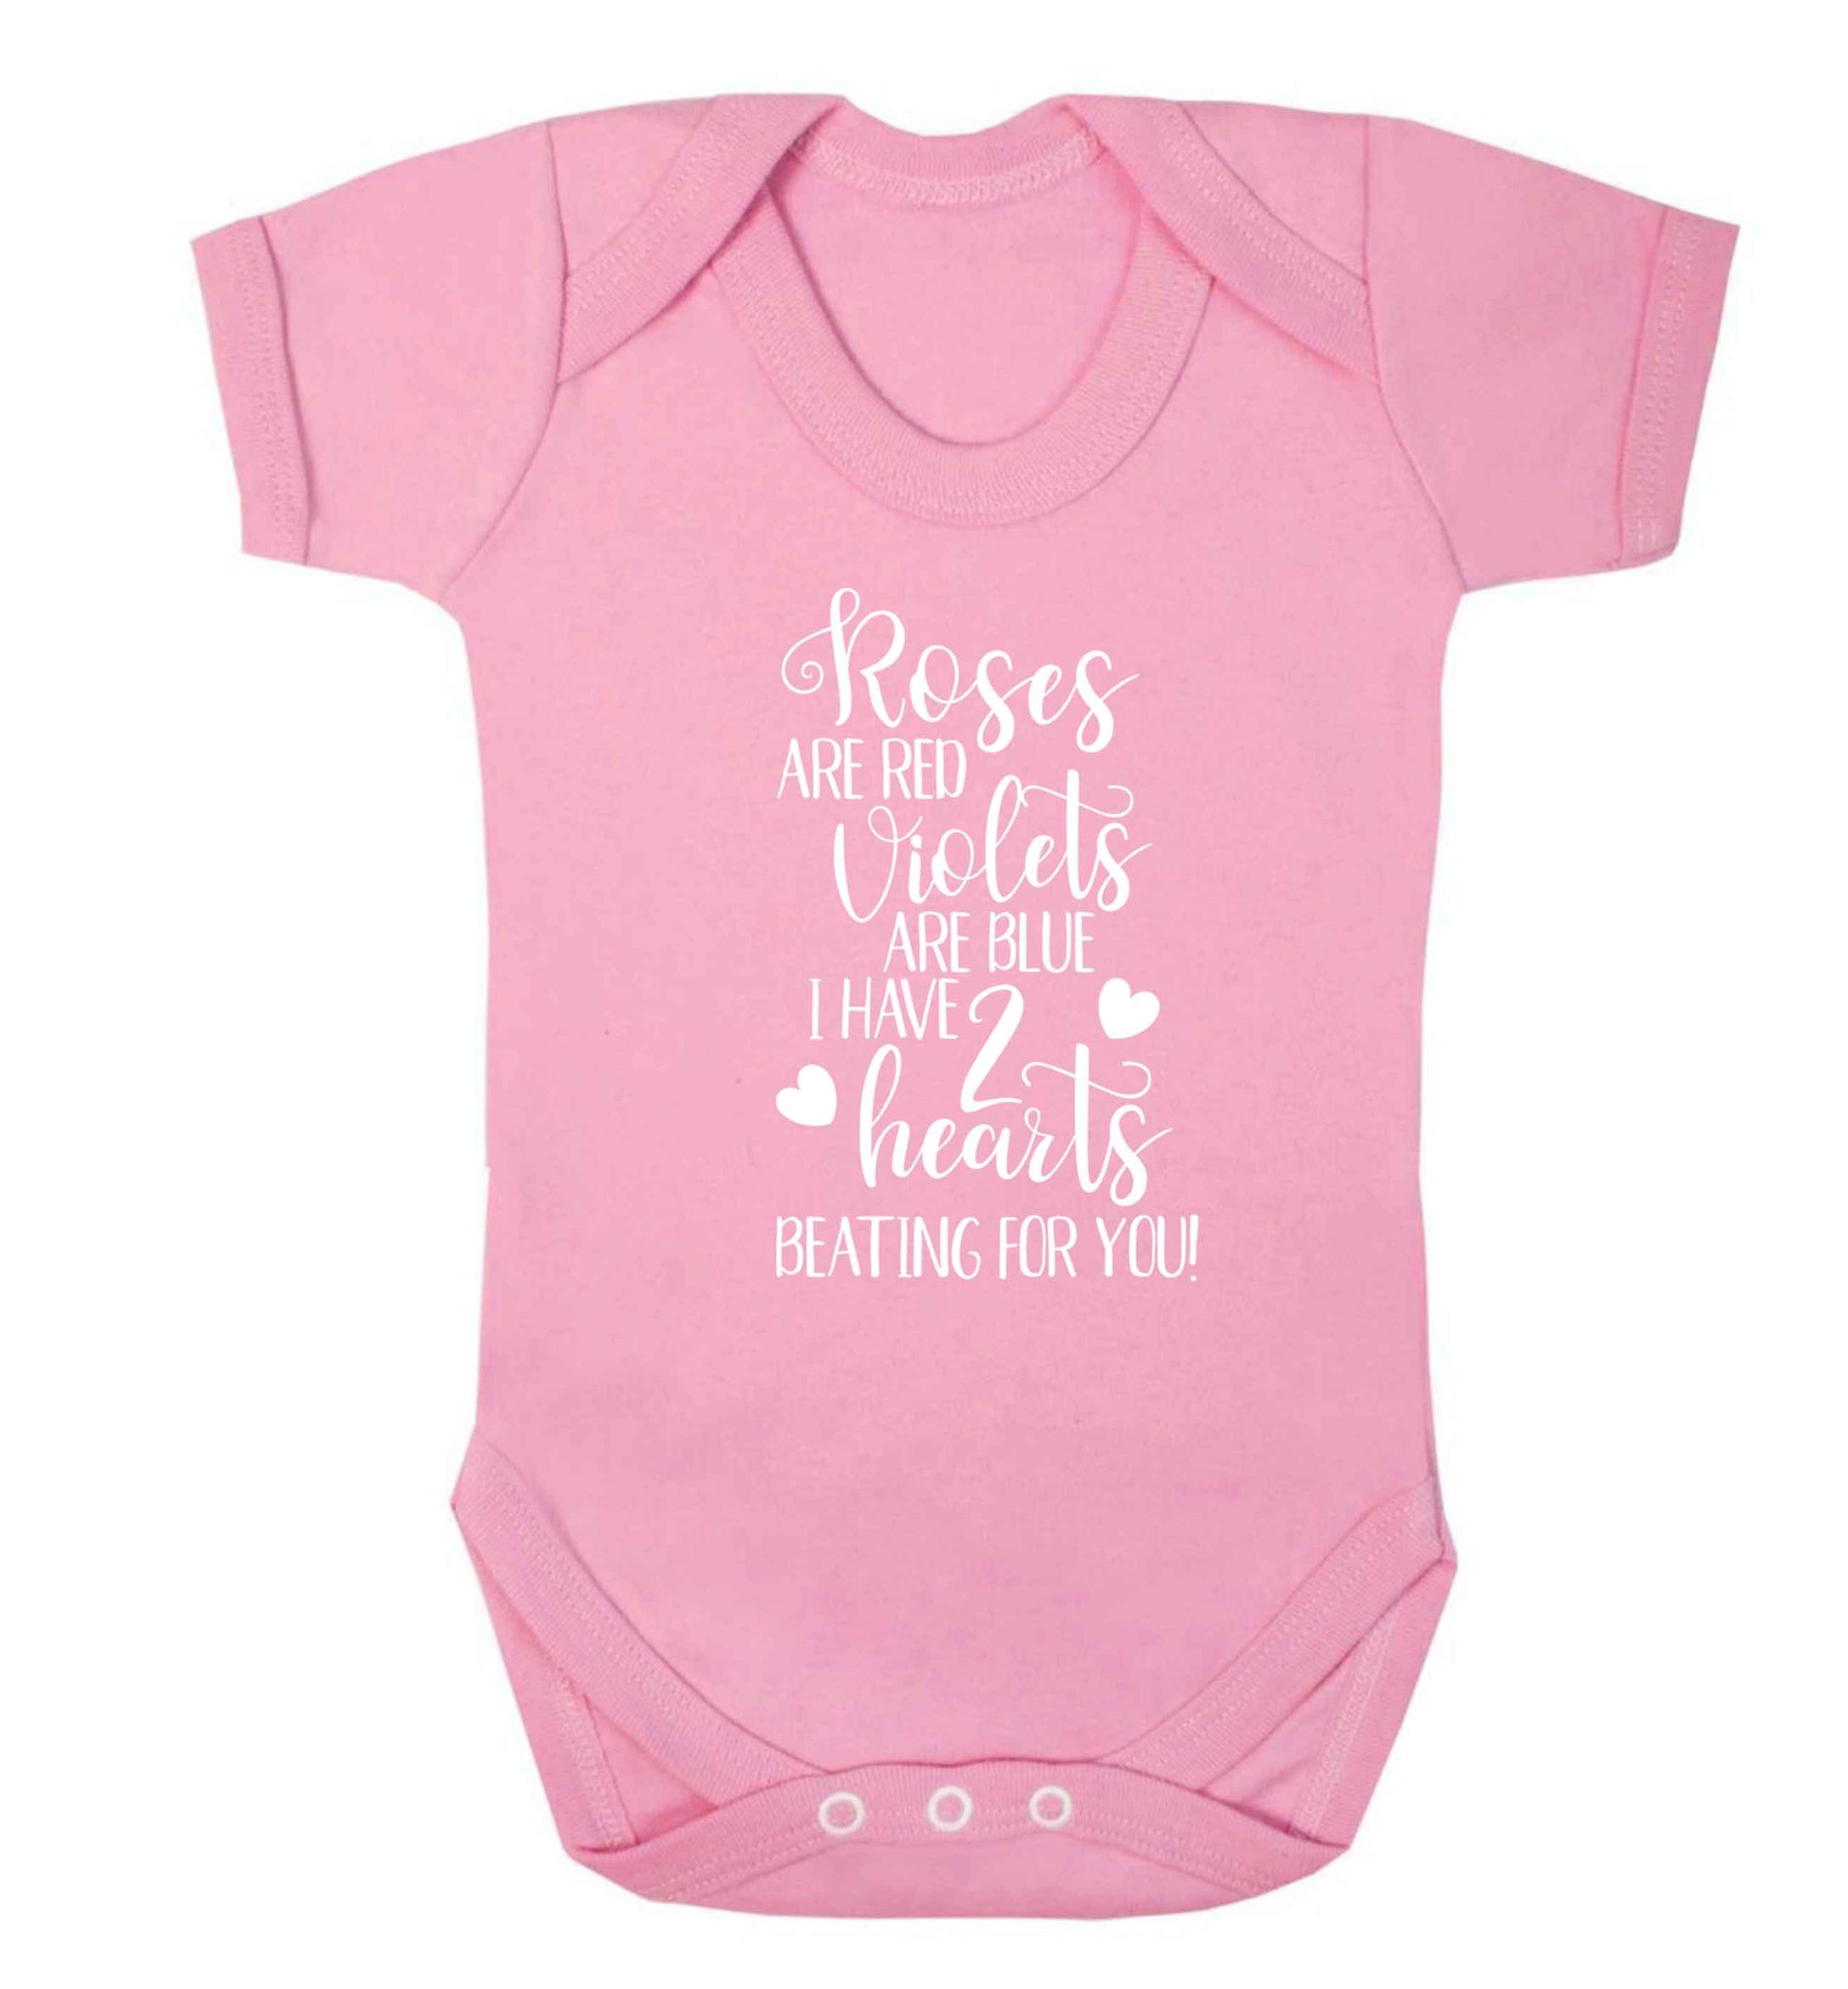 Roses are red violets are blue I have two hearts beating for you Baby Vest pale pink 18-24 months